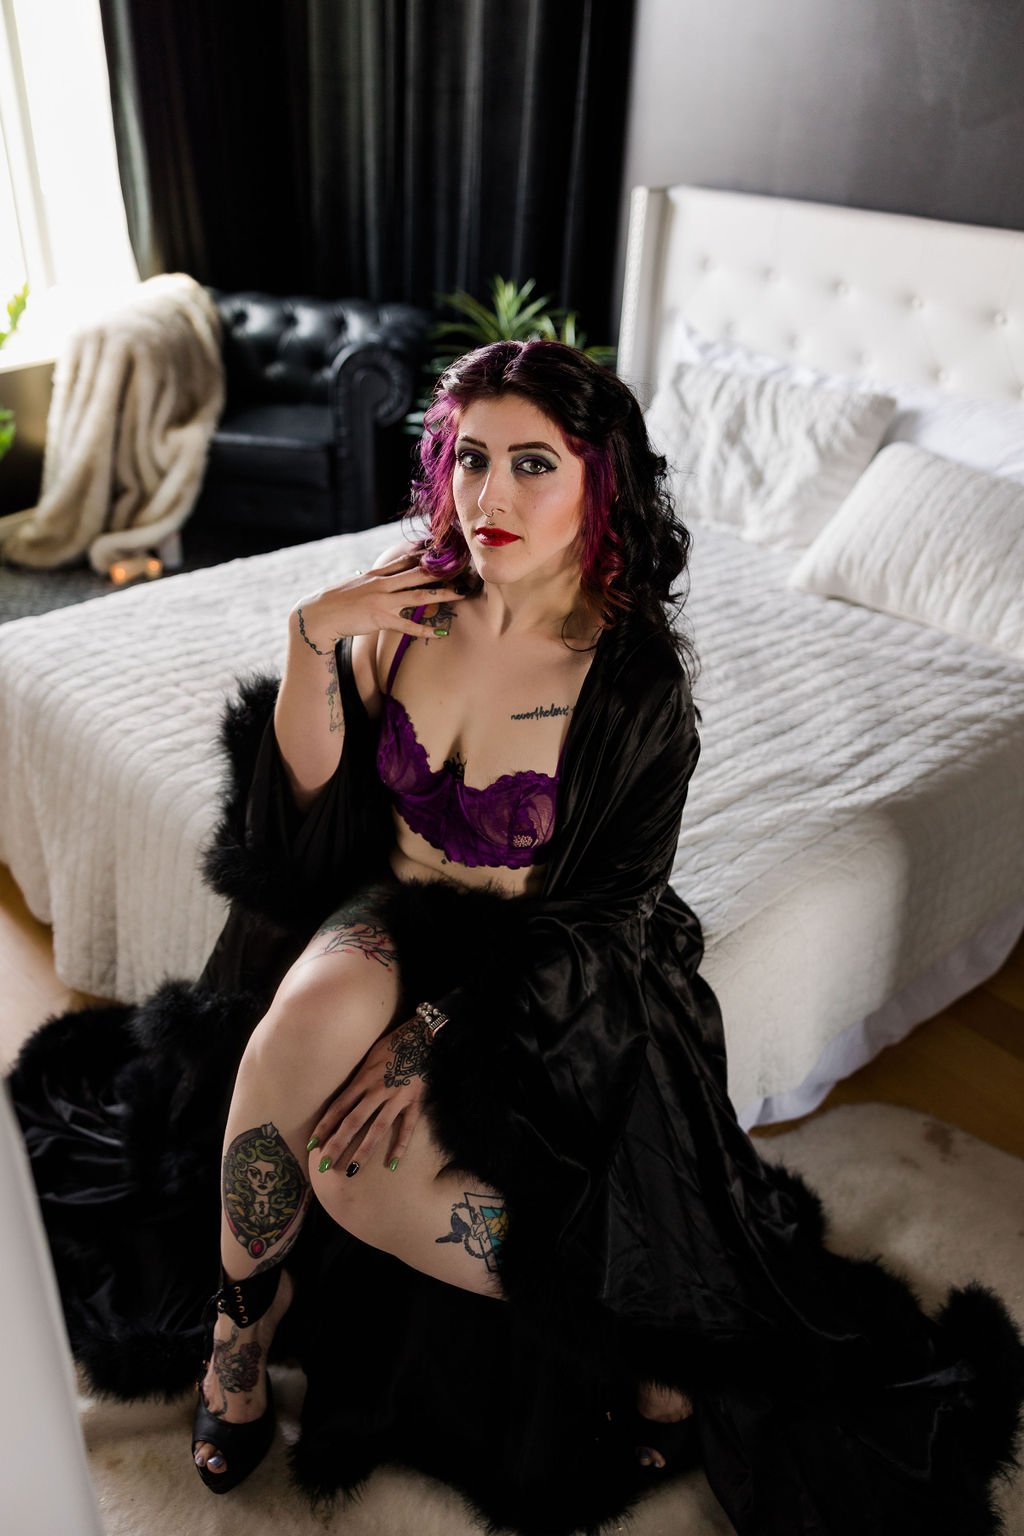 REIGN-PHILLY-DISNEY-BOUDOIR-PHOTOS-BY-SWIGER-PHOTOGRAPHY91.jpg